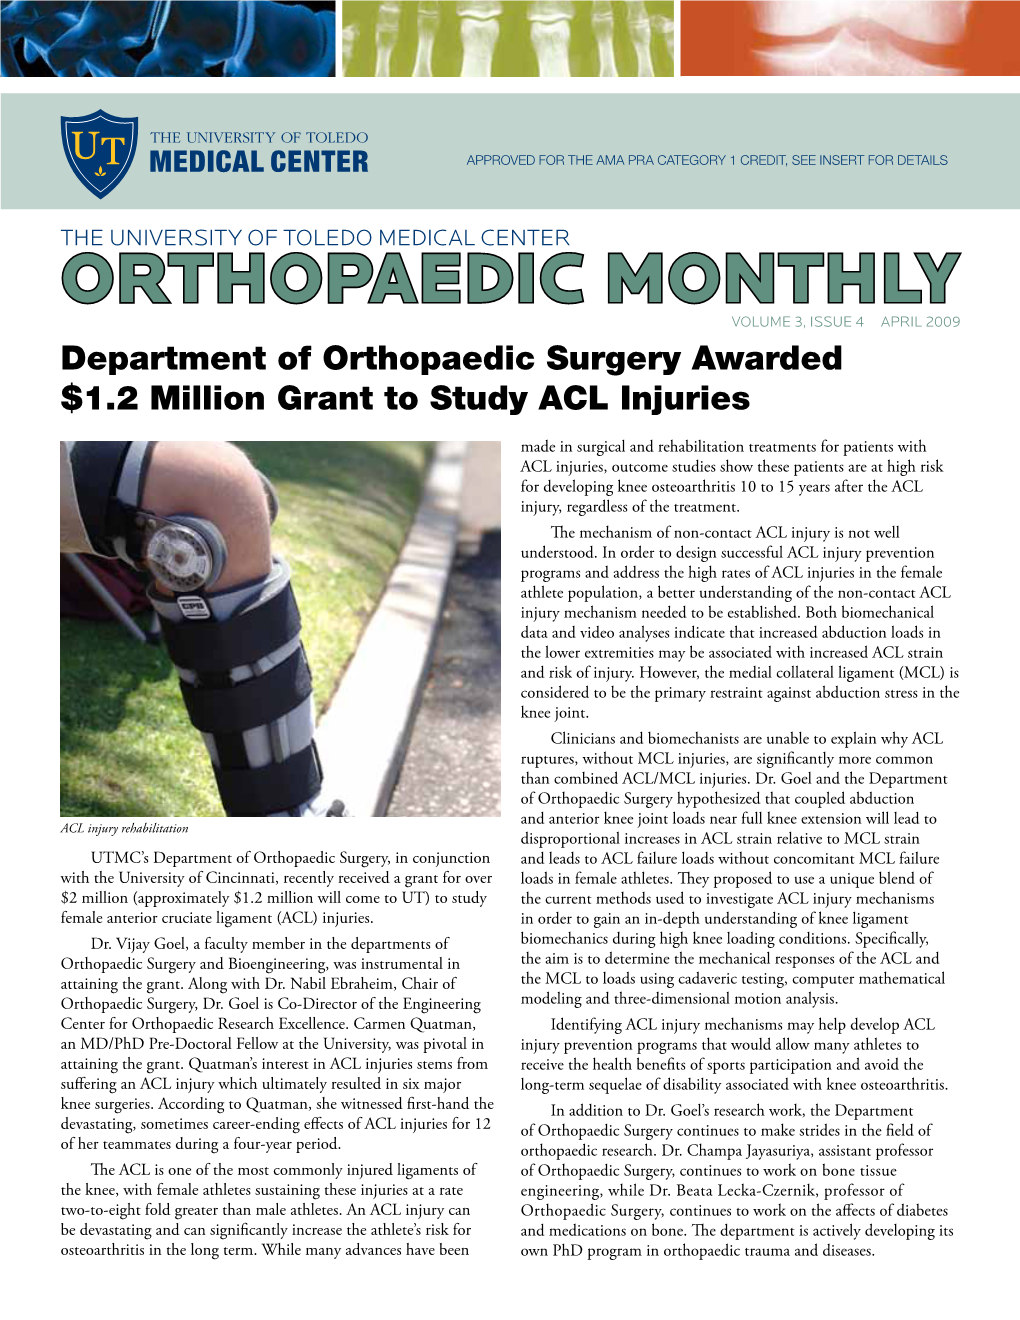 ORTHOPAEDIC MONTHLY Volume 3, Issue 4 APRIL 2009 Department of Orthopaedic Surgery Awarded $1.2 Million Grant to Study ACL Injuries